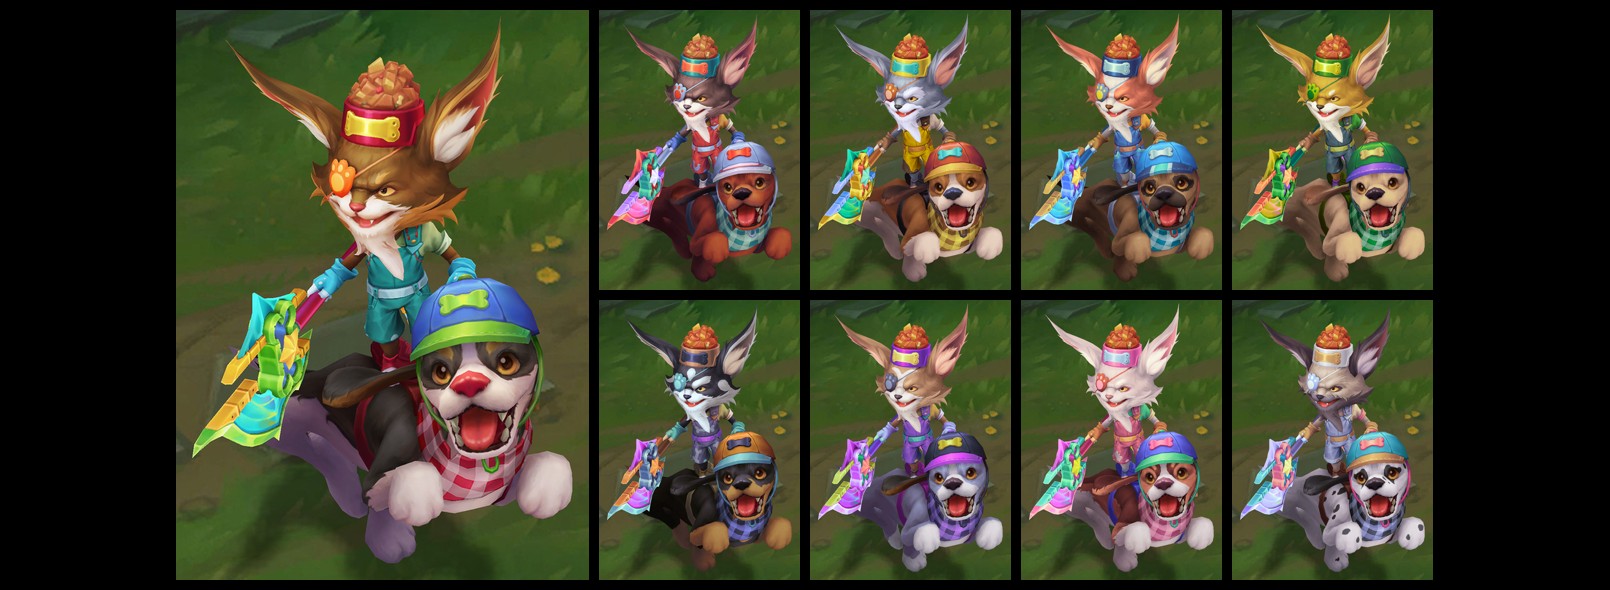 Chromas for Kibble-Head Kled, Kittalee, Shiba Yuumi, and Woof and Lamb Kindred